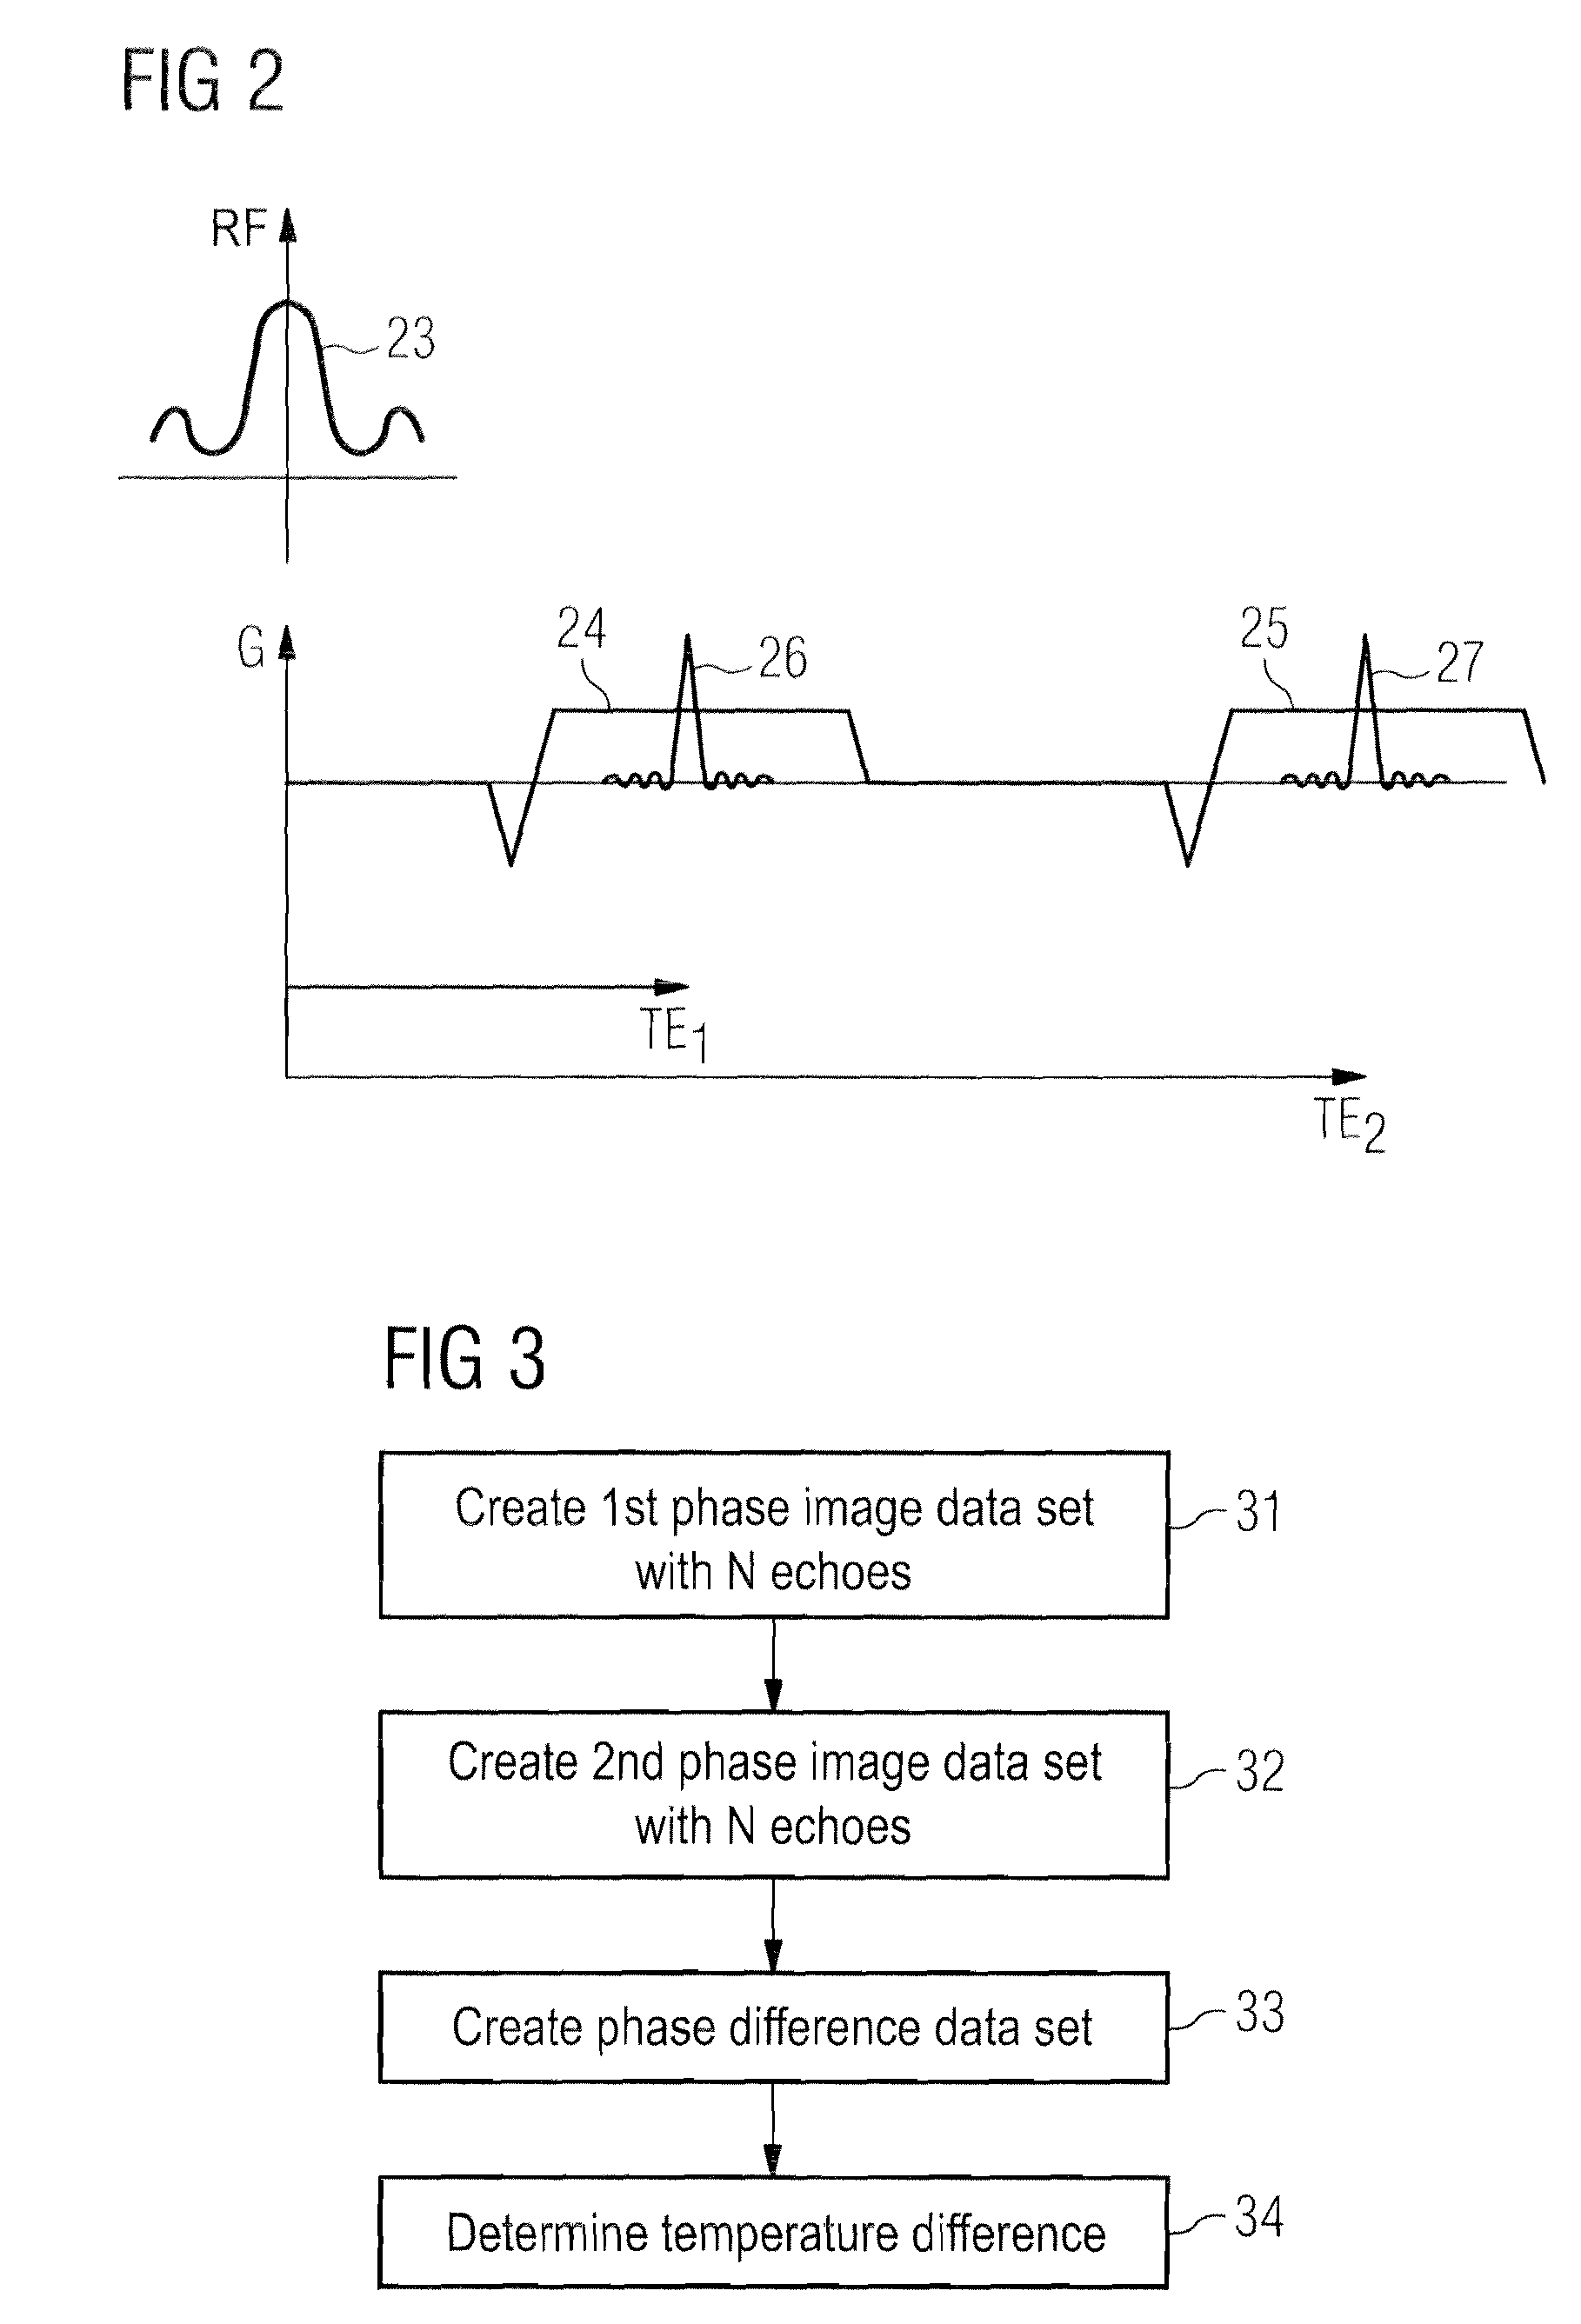 Method for obtaining magnetic resonance image data using a multi-echo mr sequence with improved signal-to-noise ratio of the phase information